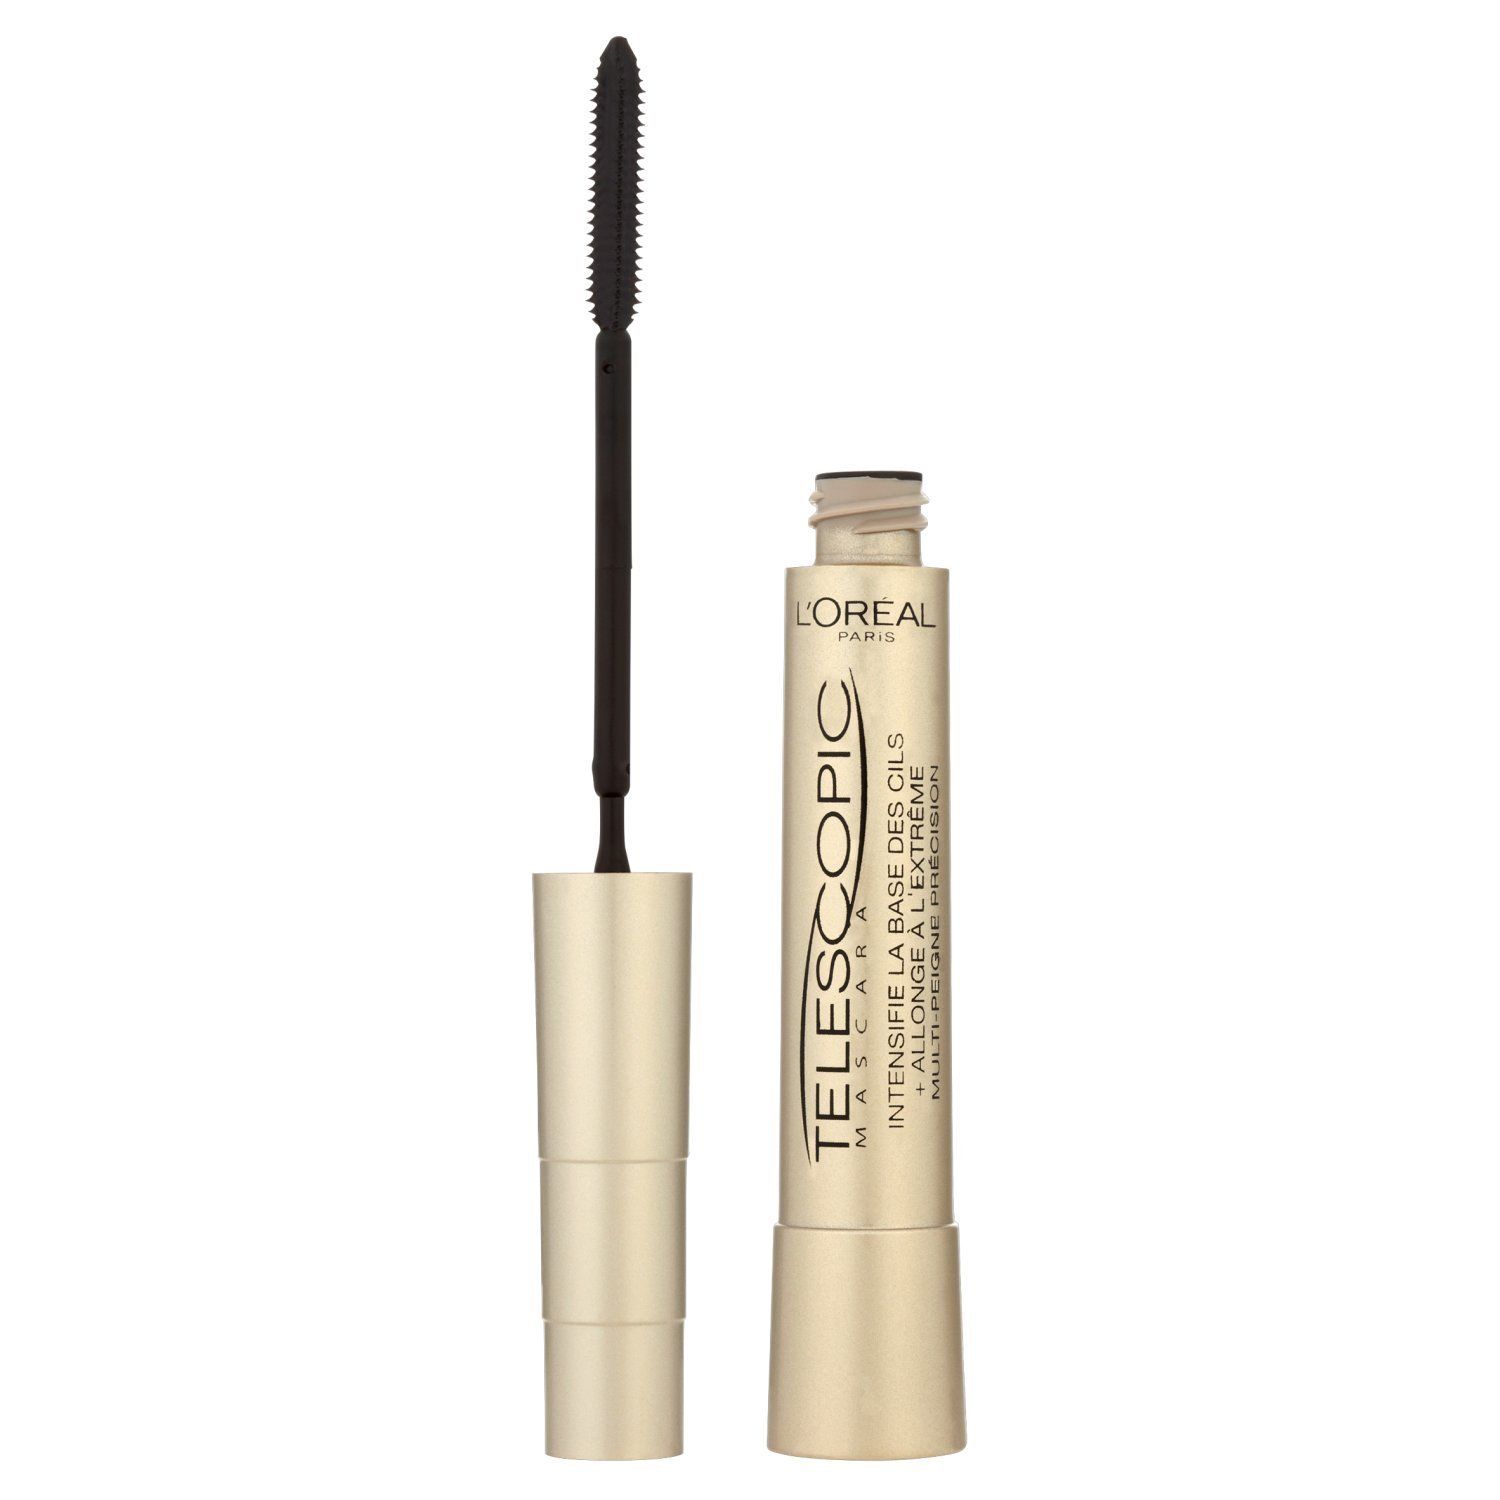 The high-precision flexible multi-comb L'Oréal Telescopic Mascara 8 ml is made of supple elastomer bristles that help give a precise application. The flat surfaces of the multi-comb stretch the formula from the roots of your lashes right through to the tips. High-precision intensity for longer looking lashes. In a flash of a stroke up to 60 per cent longer looking lashes and intensity lash by lash. Please note that these are supplied to us in factory sealed 3 packs which we split to supply singles.